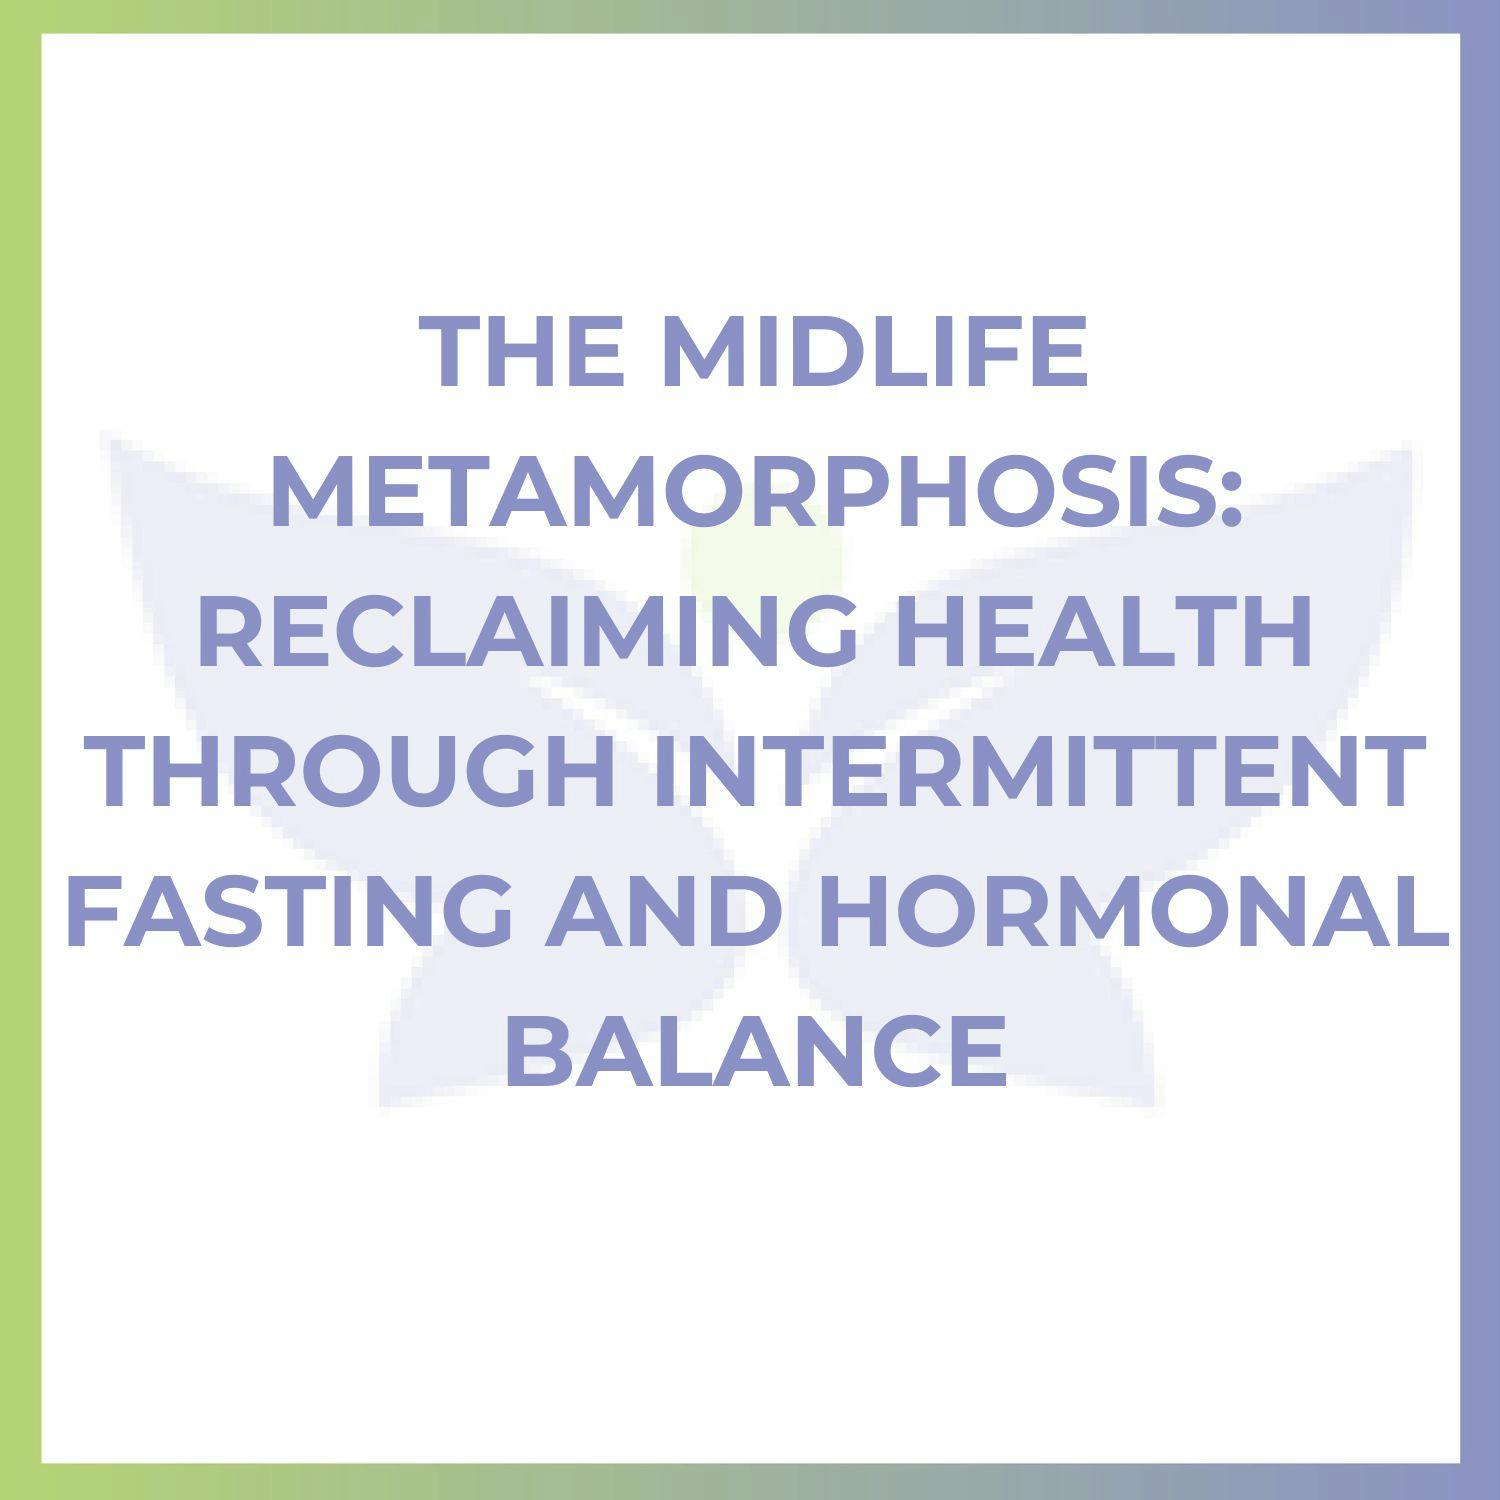 The Midlife Metamorphosis: Reclaiming Health Through Intermittent Fasting and Hormonal Balance with Dr. Tabatha Barber